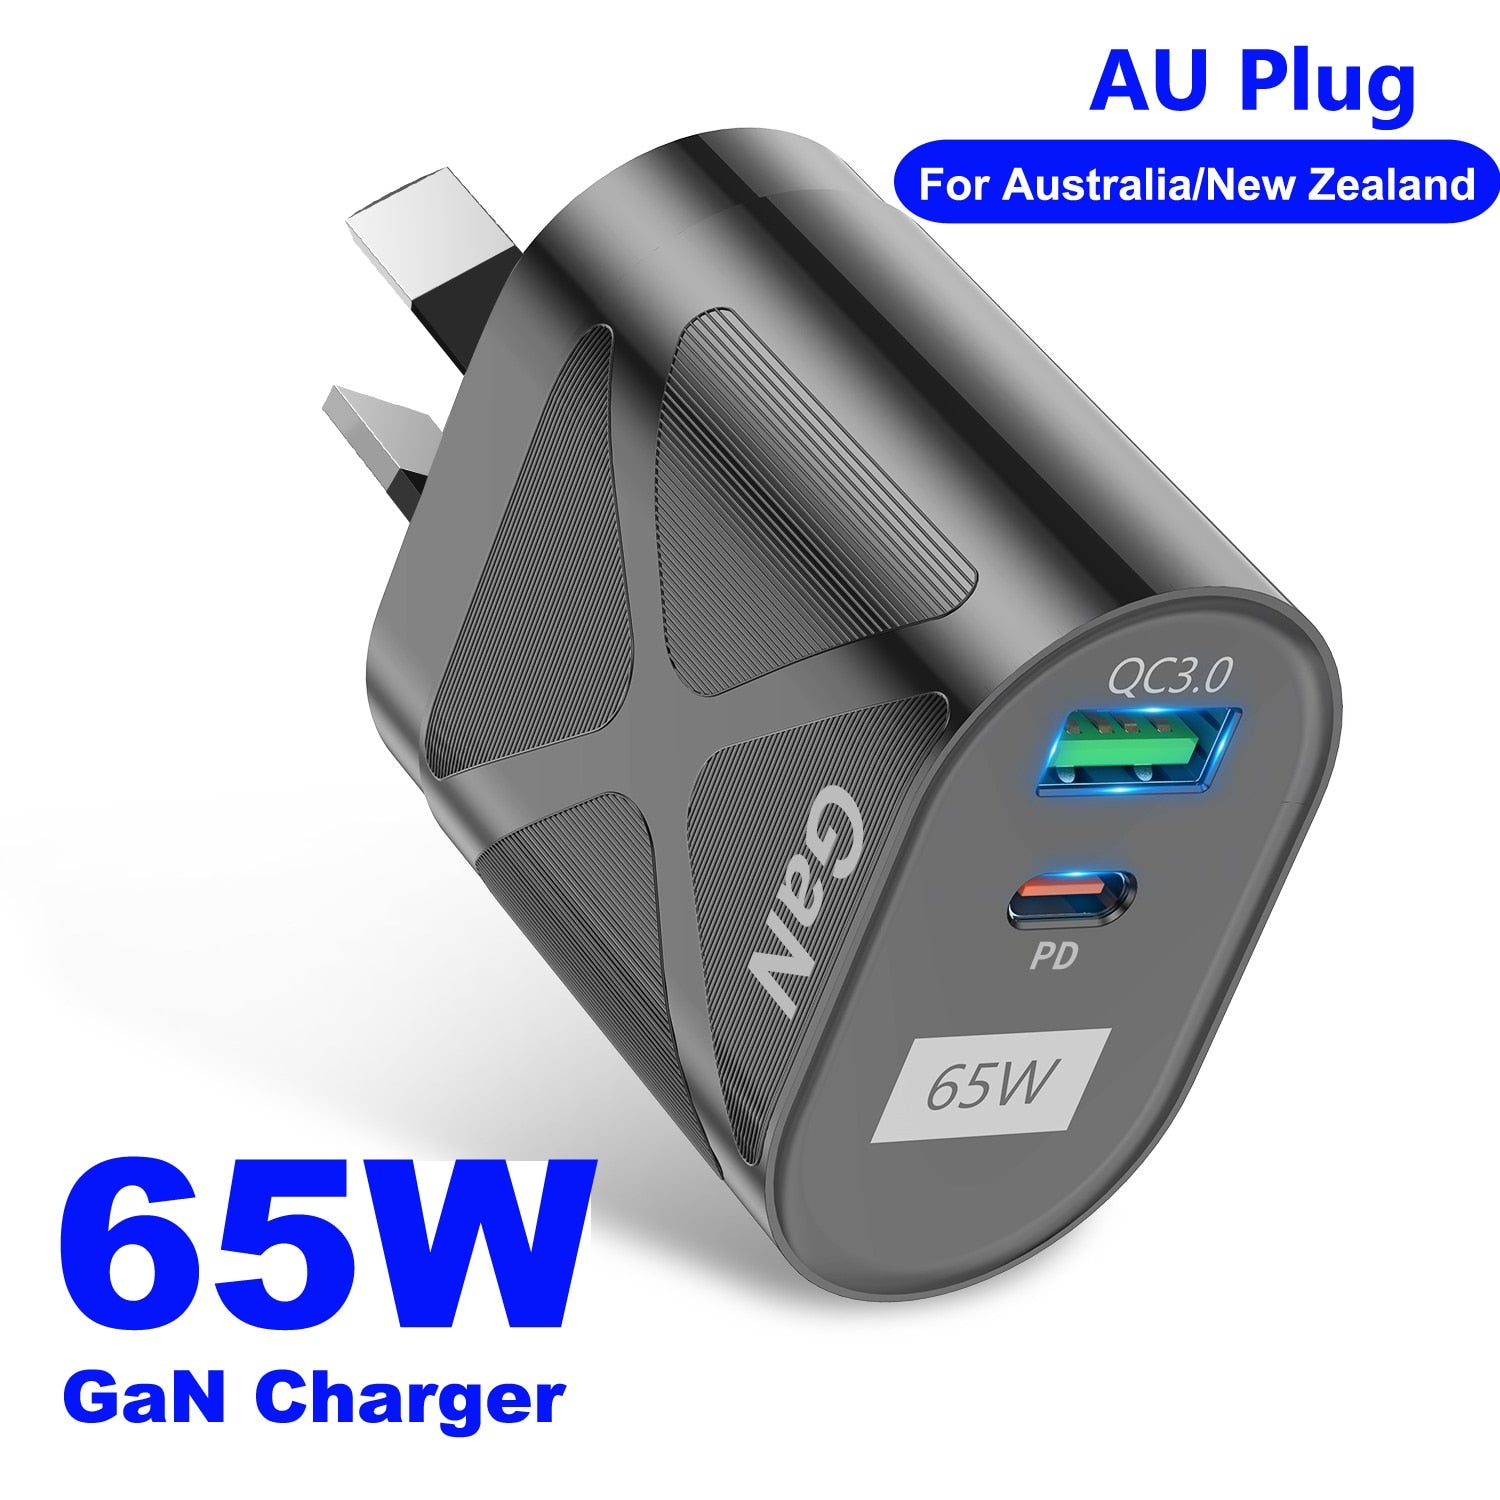 65W Gan Charger for Australia New Zealand AU Plug PD 33W Fast Charger QC 3.0 USB Adapter for iPhone 14 13 Pro Max Samsung S22